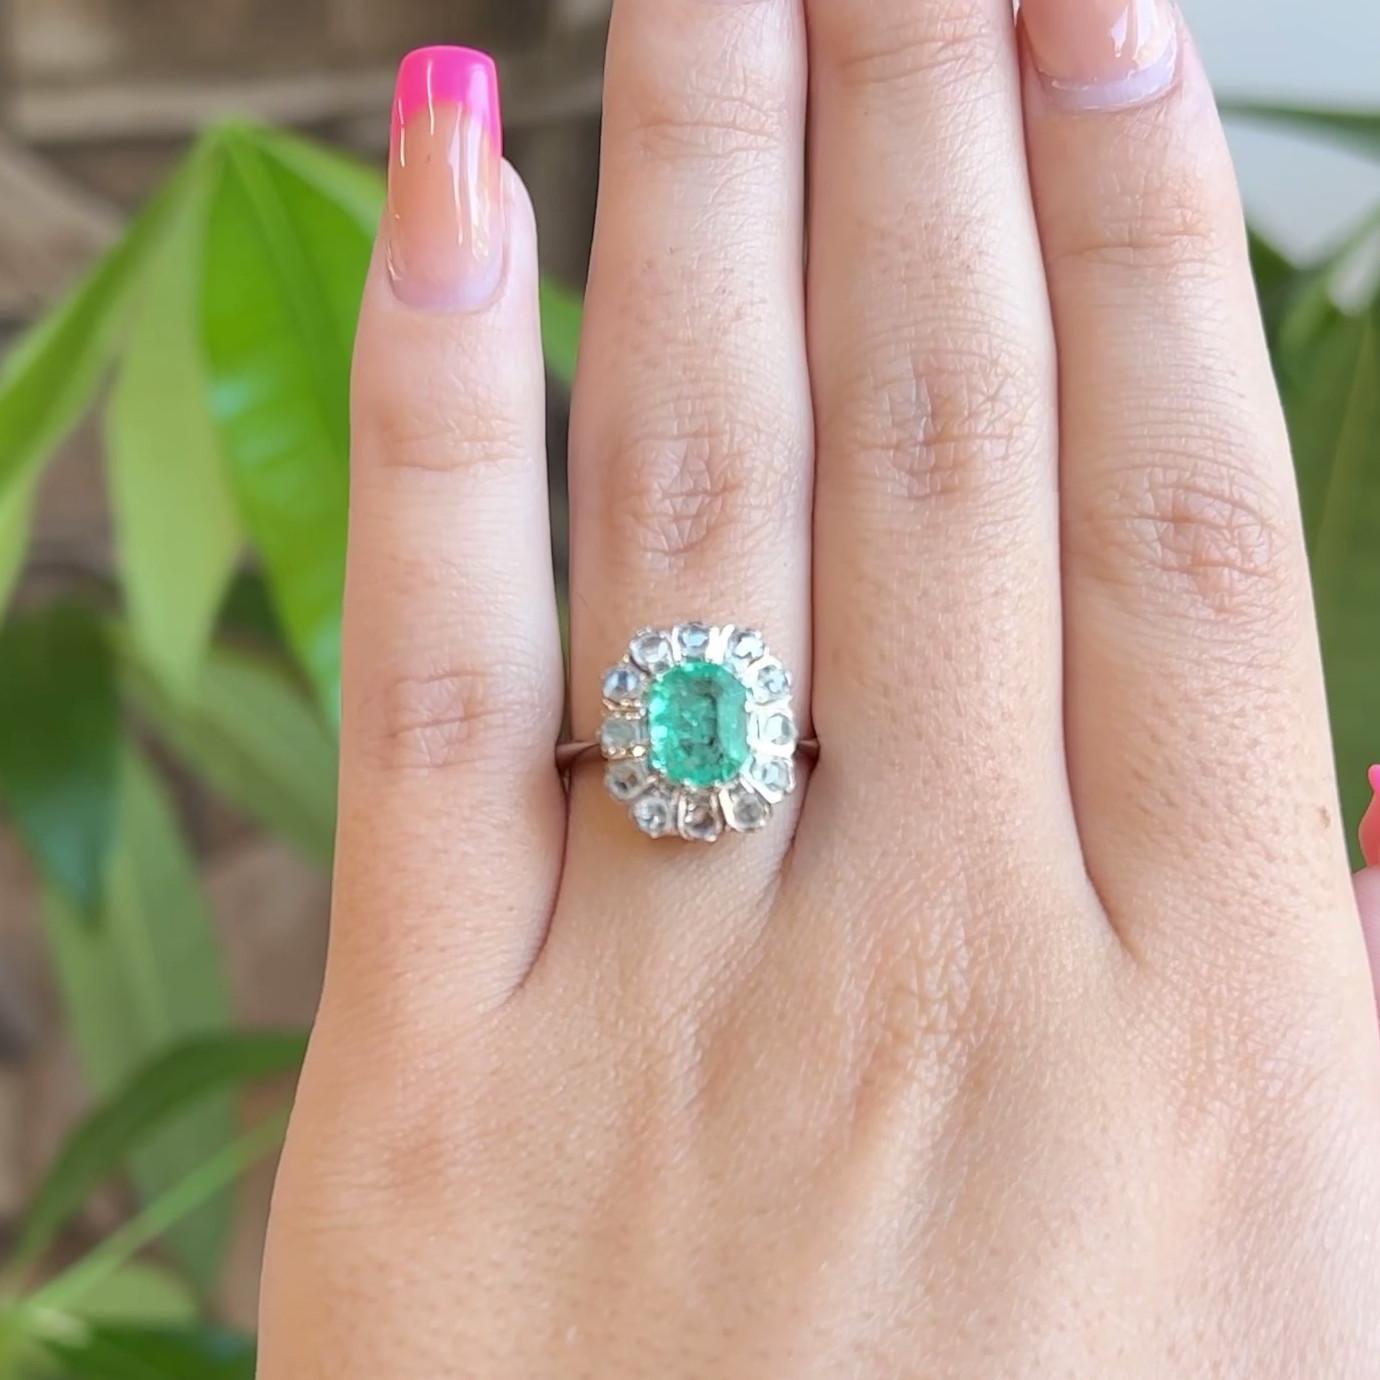 One Vintage Emerald Diamond 18 Karat White Gold Cluster Ring. Featuring one rectangular step cut emerald of approximately 1.15 carats. Accented by 12 rose cut diamonds with a total weight of approximately 0.75 carat, graded near-colorless, VS-SI